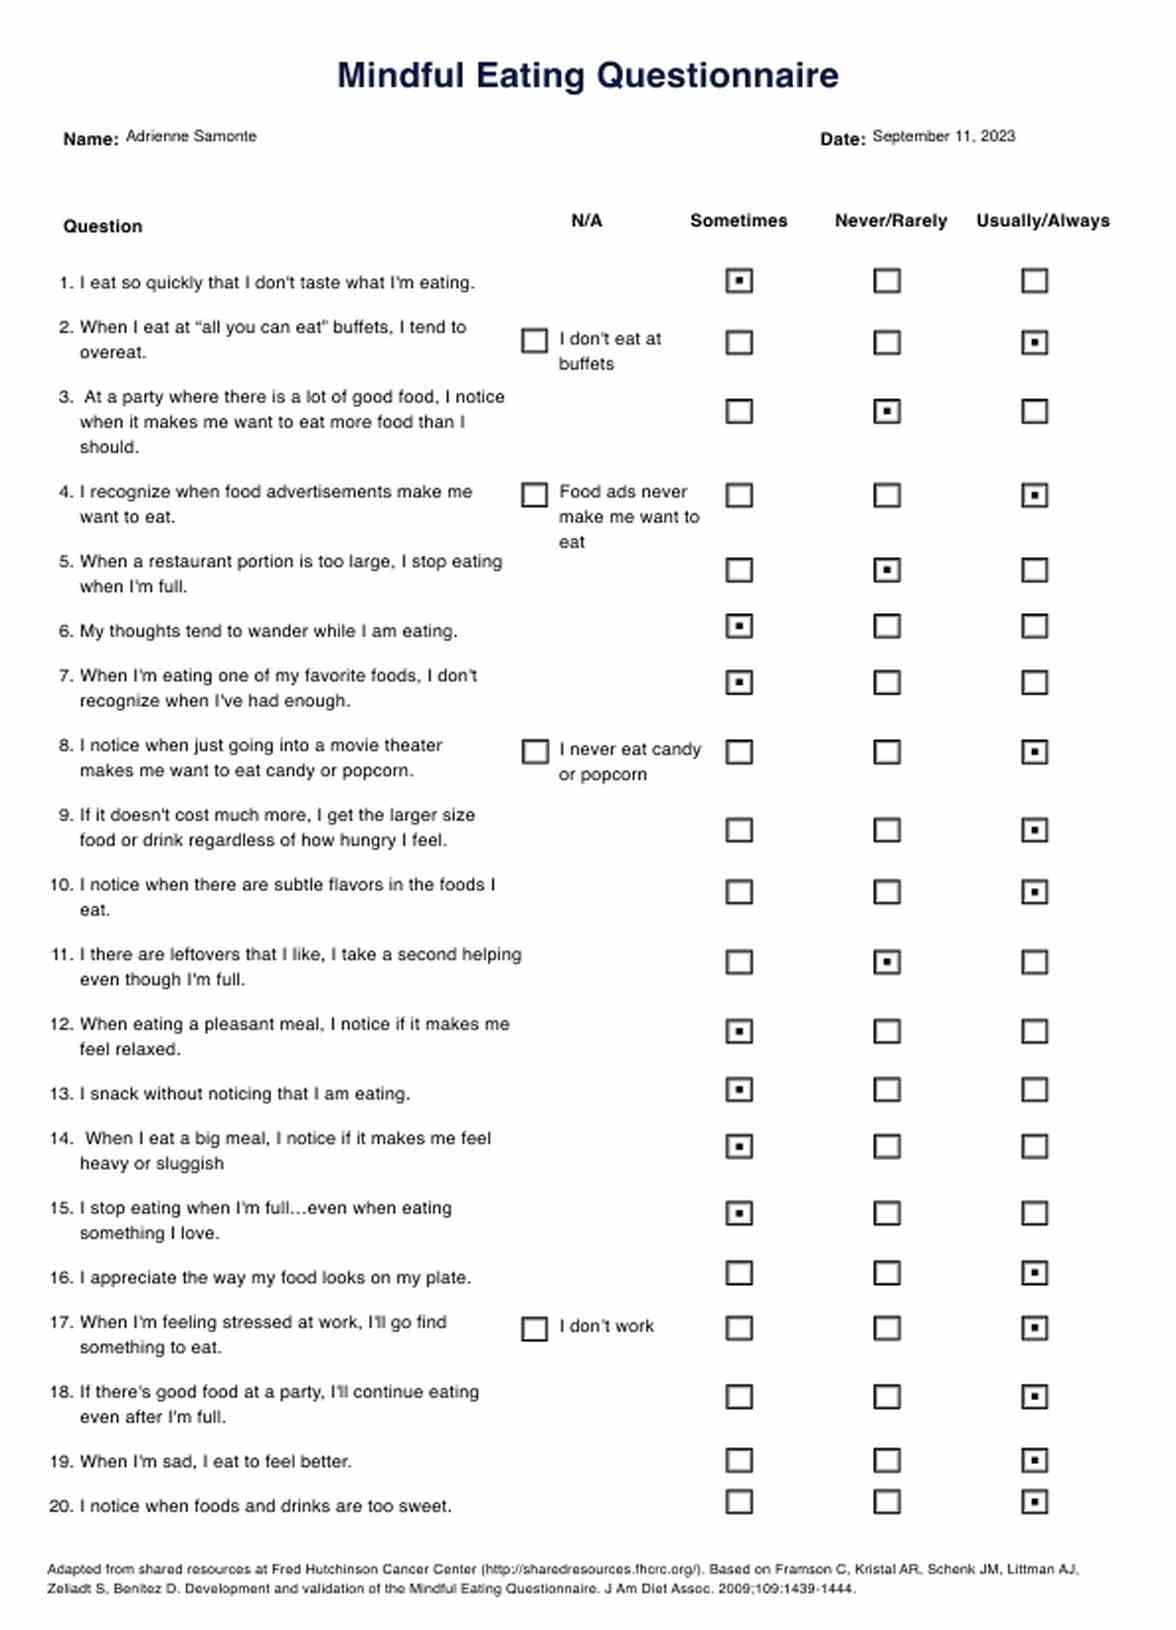 Mindful Eating Questionnaire PDF Example